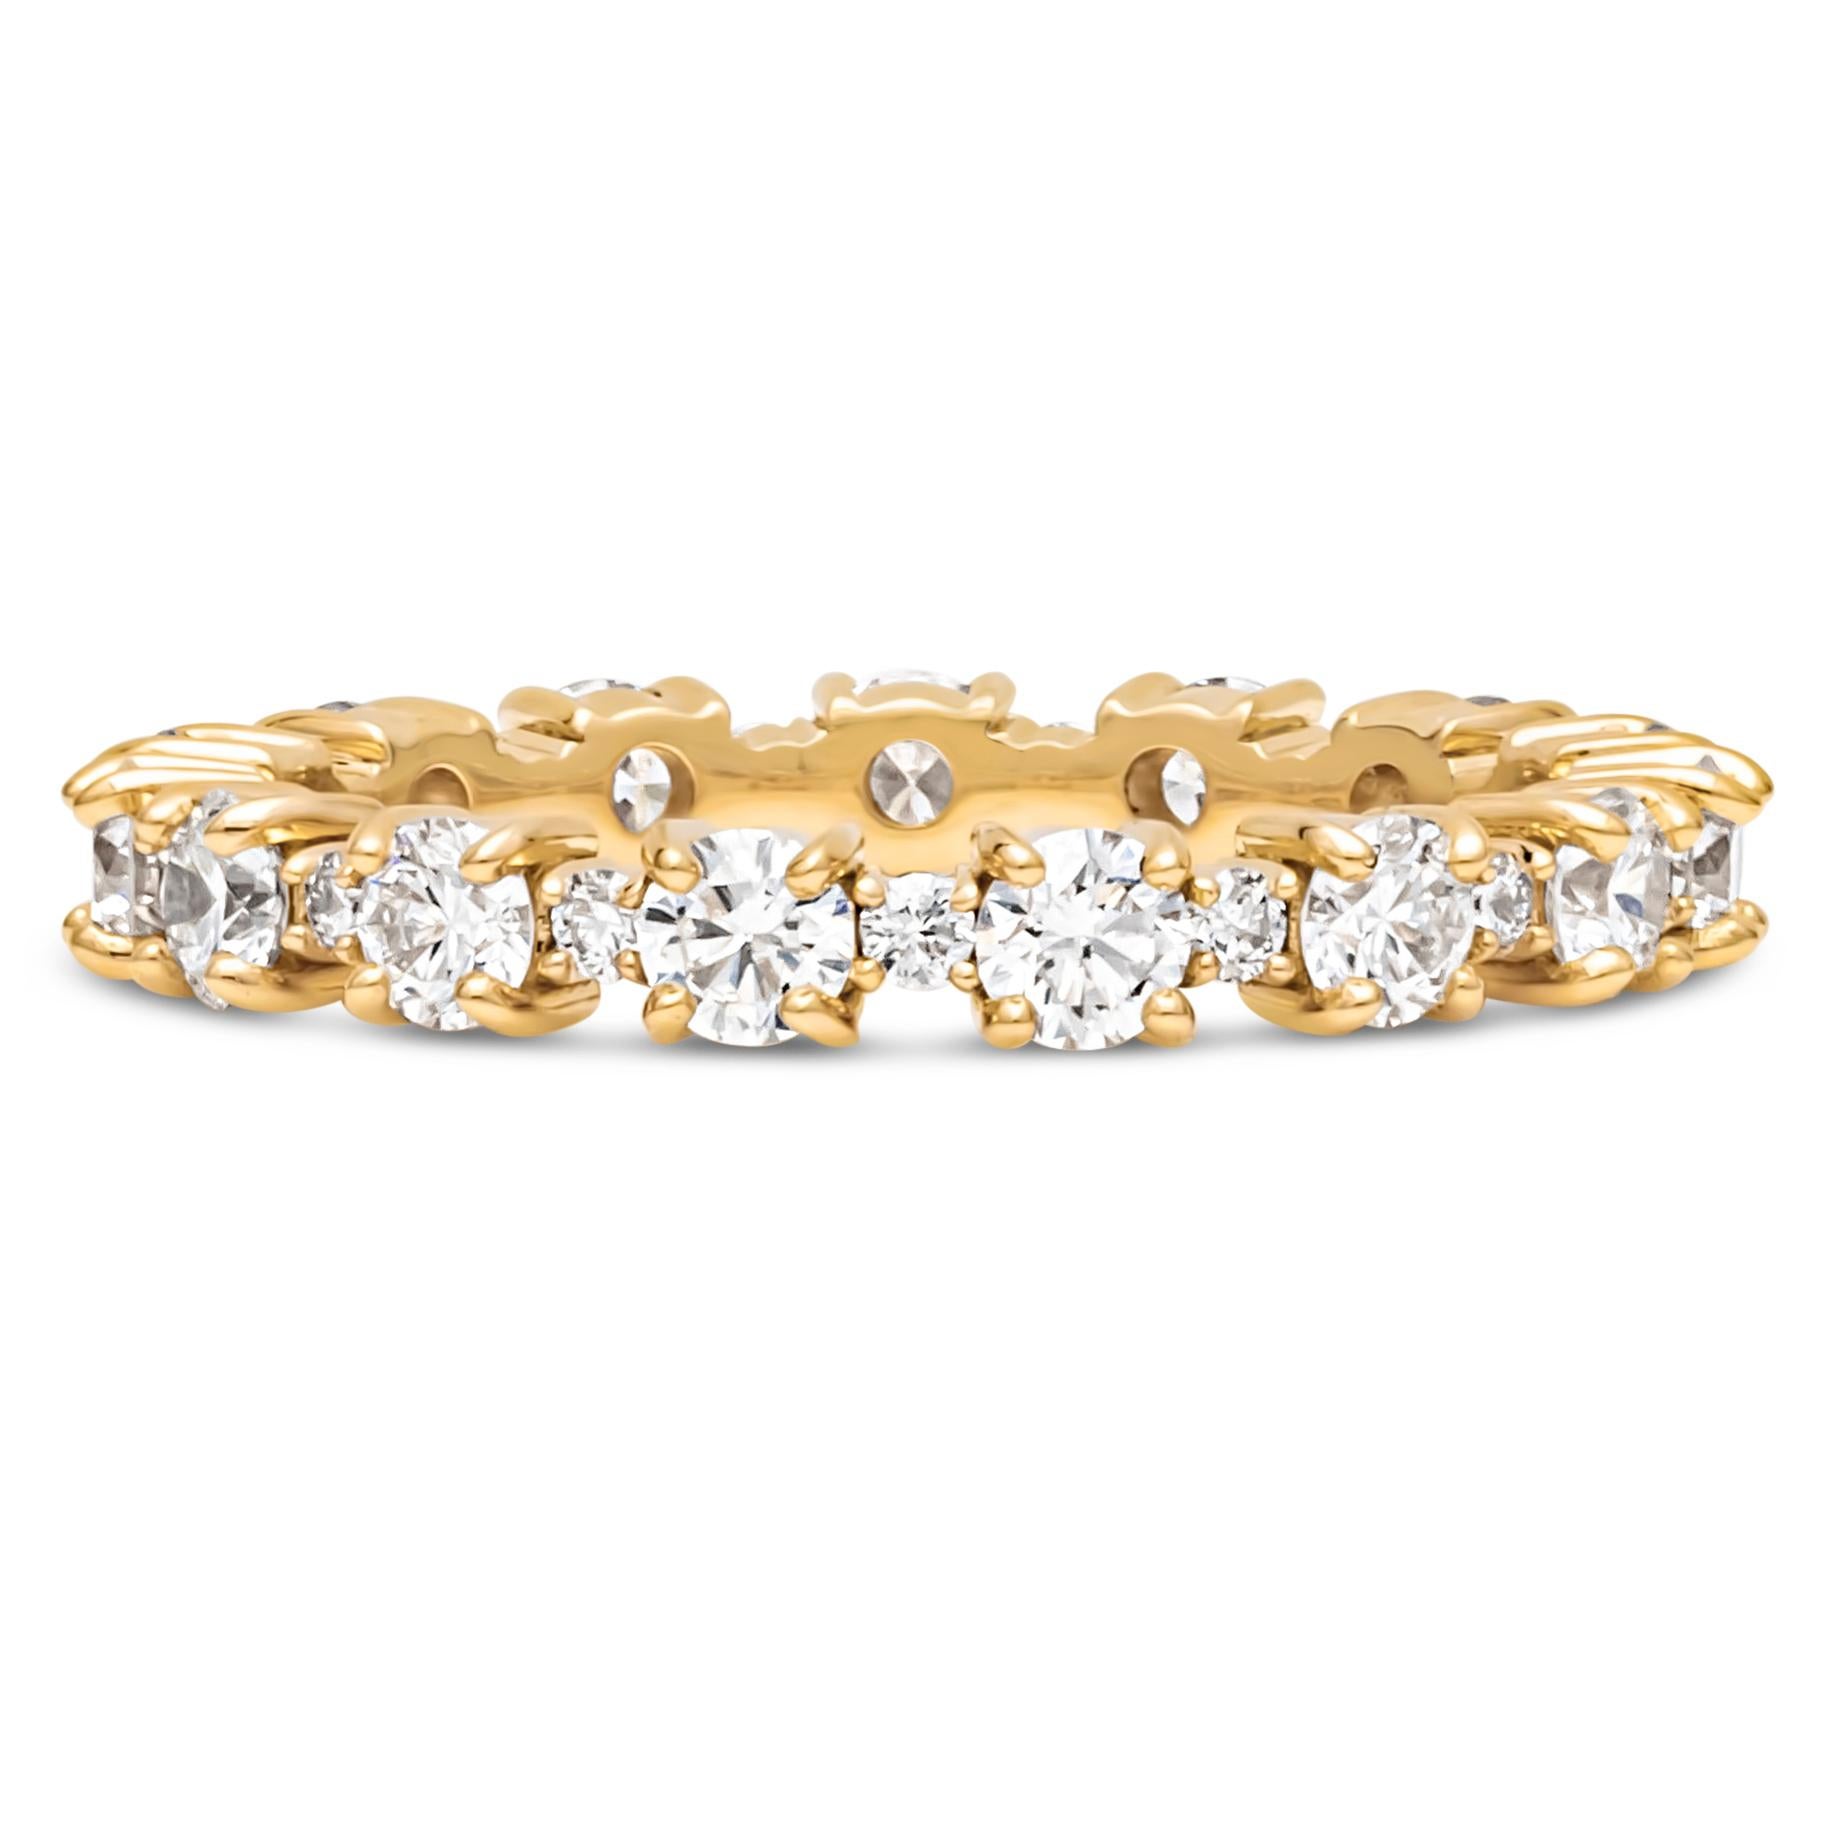 A uniquely-designed eternity wedding band showcasing a row of round brilliant diamonds elegantly spaced by smaller round melee diamonds weigh 1.34 carats total, H Color and VS in Clarity. Set in a classic four prong basket setting and Made in 18K